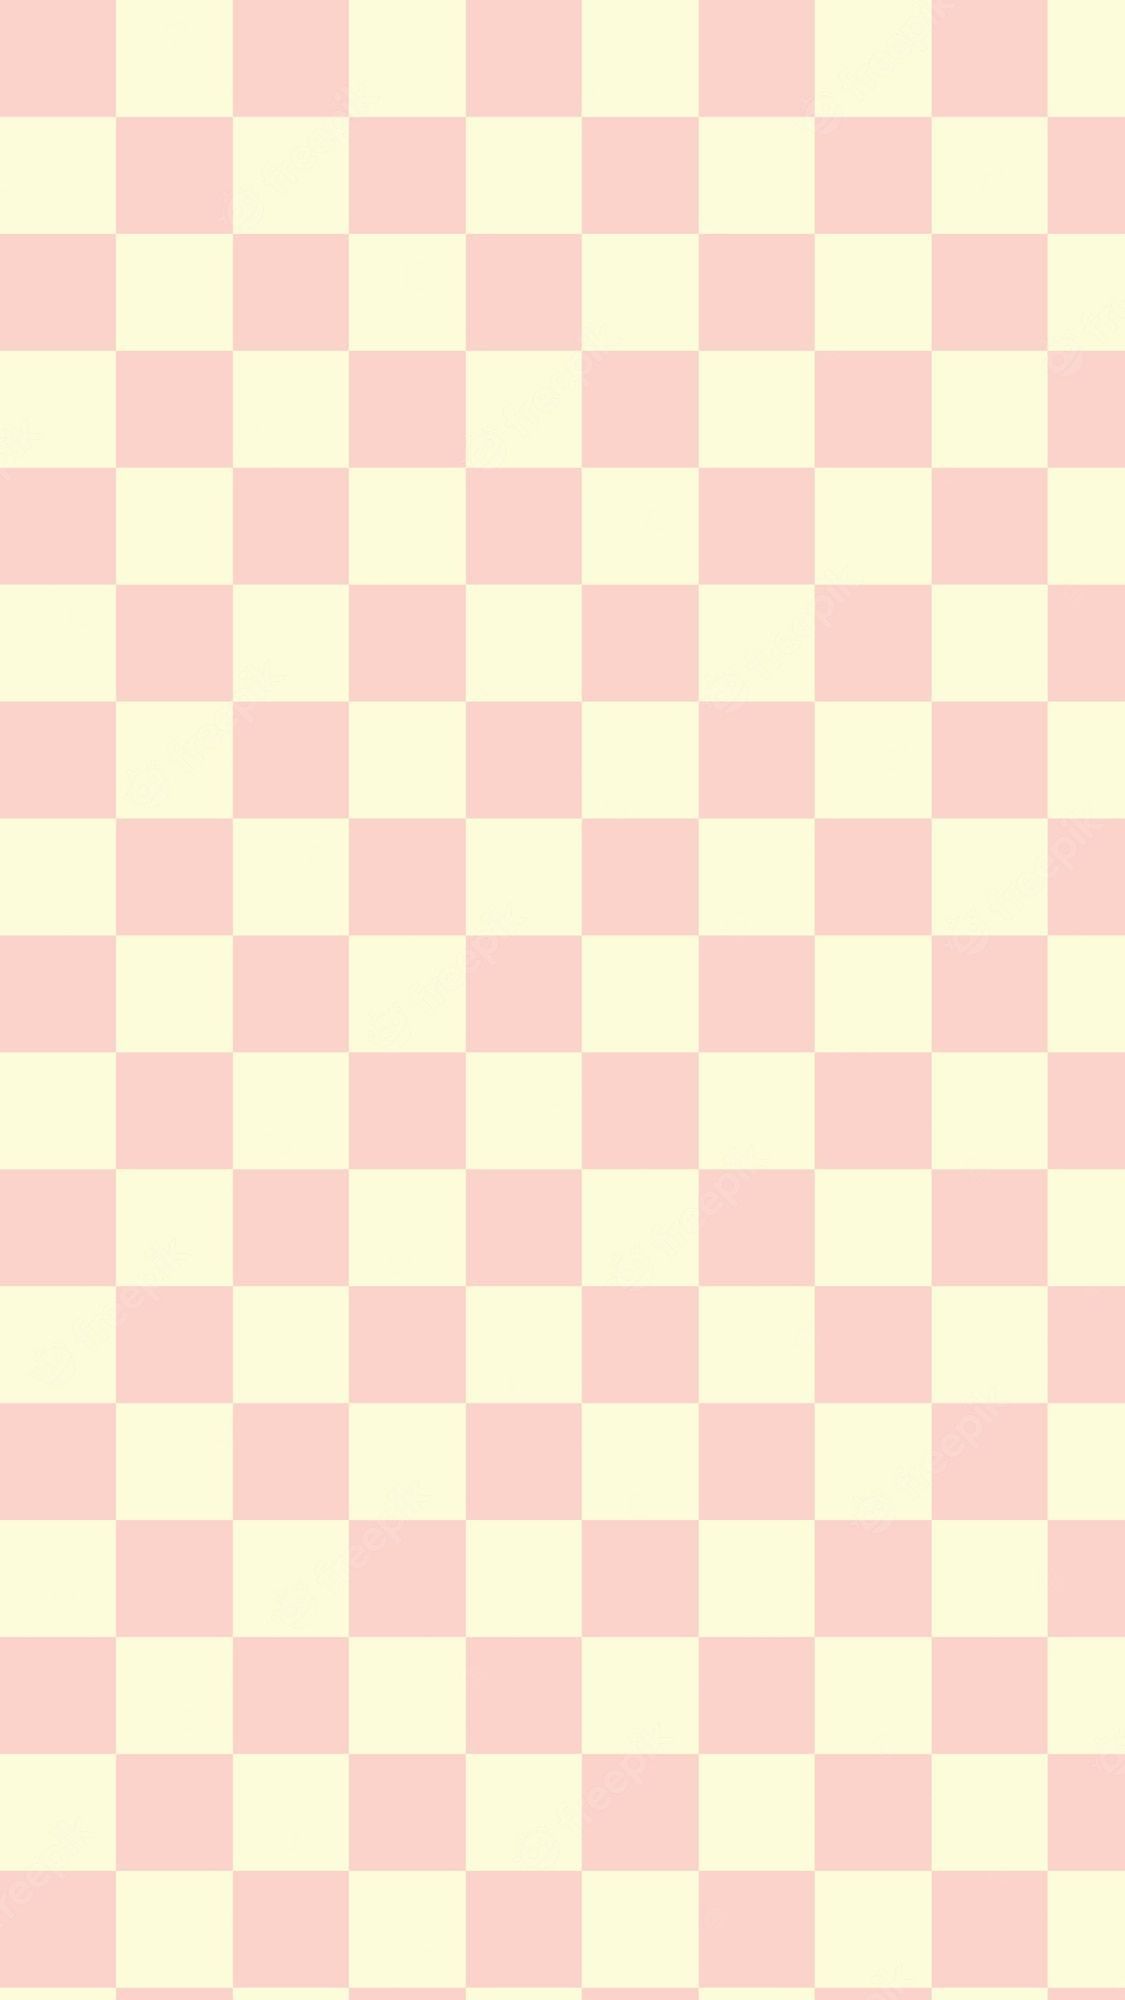 A pink and white checkered background - Light yellow, pastel orange